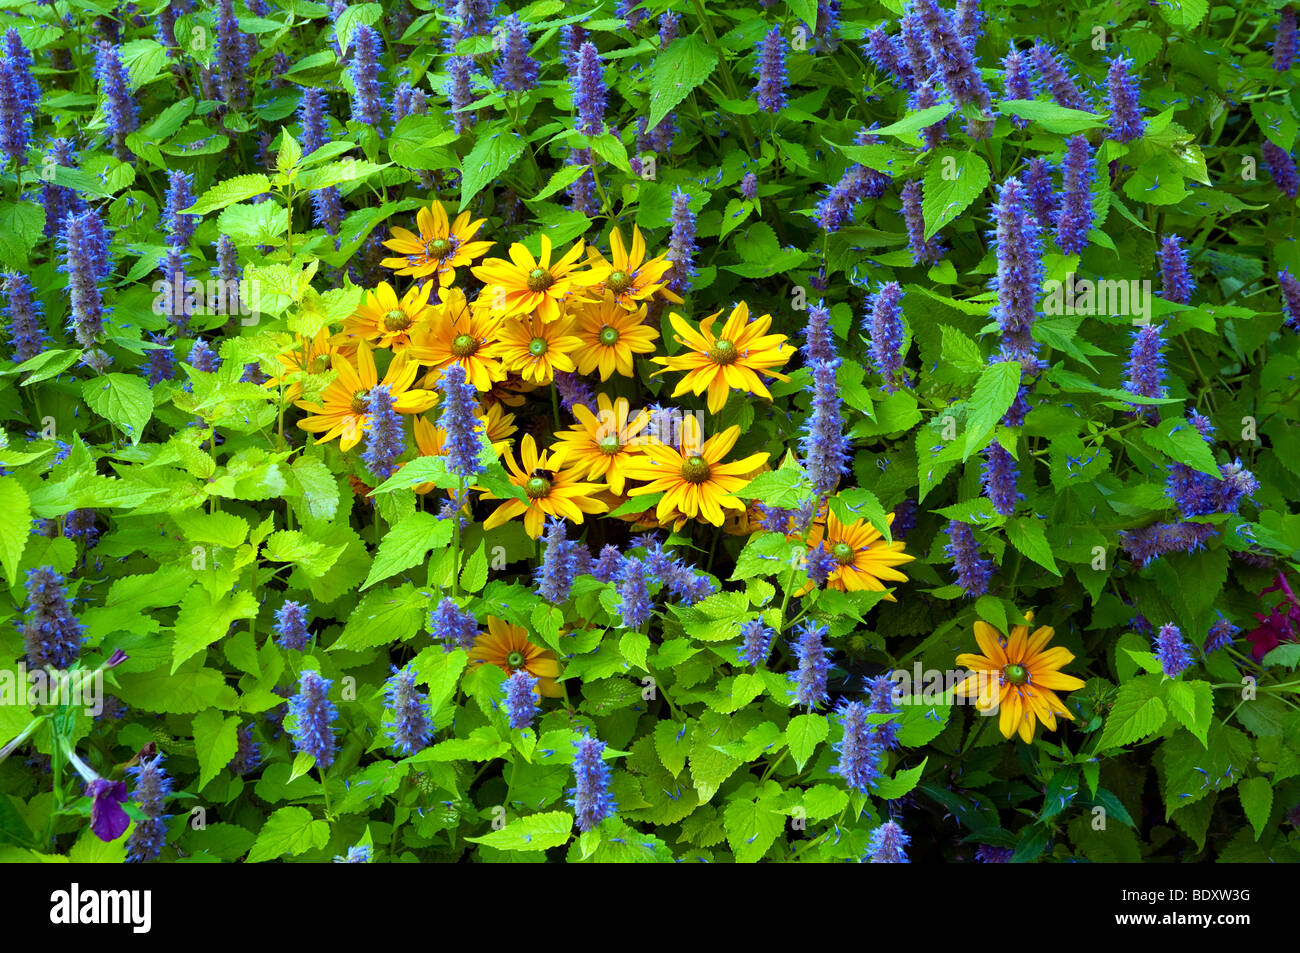 Flower beds, garden paths and flower arrangements at the English Gardens in the Assiniboine Park in Winnipeg, Manitoba, Canada. Stock Photo